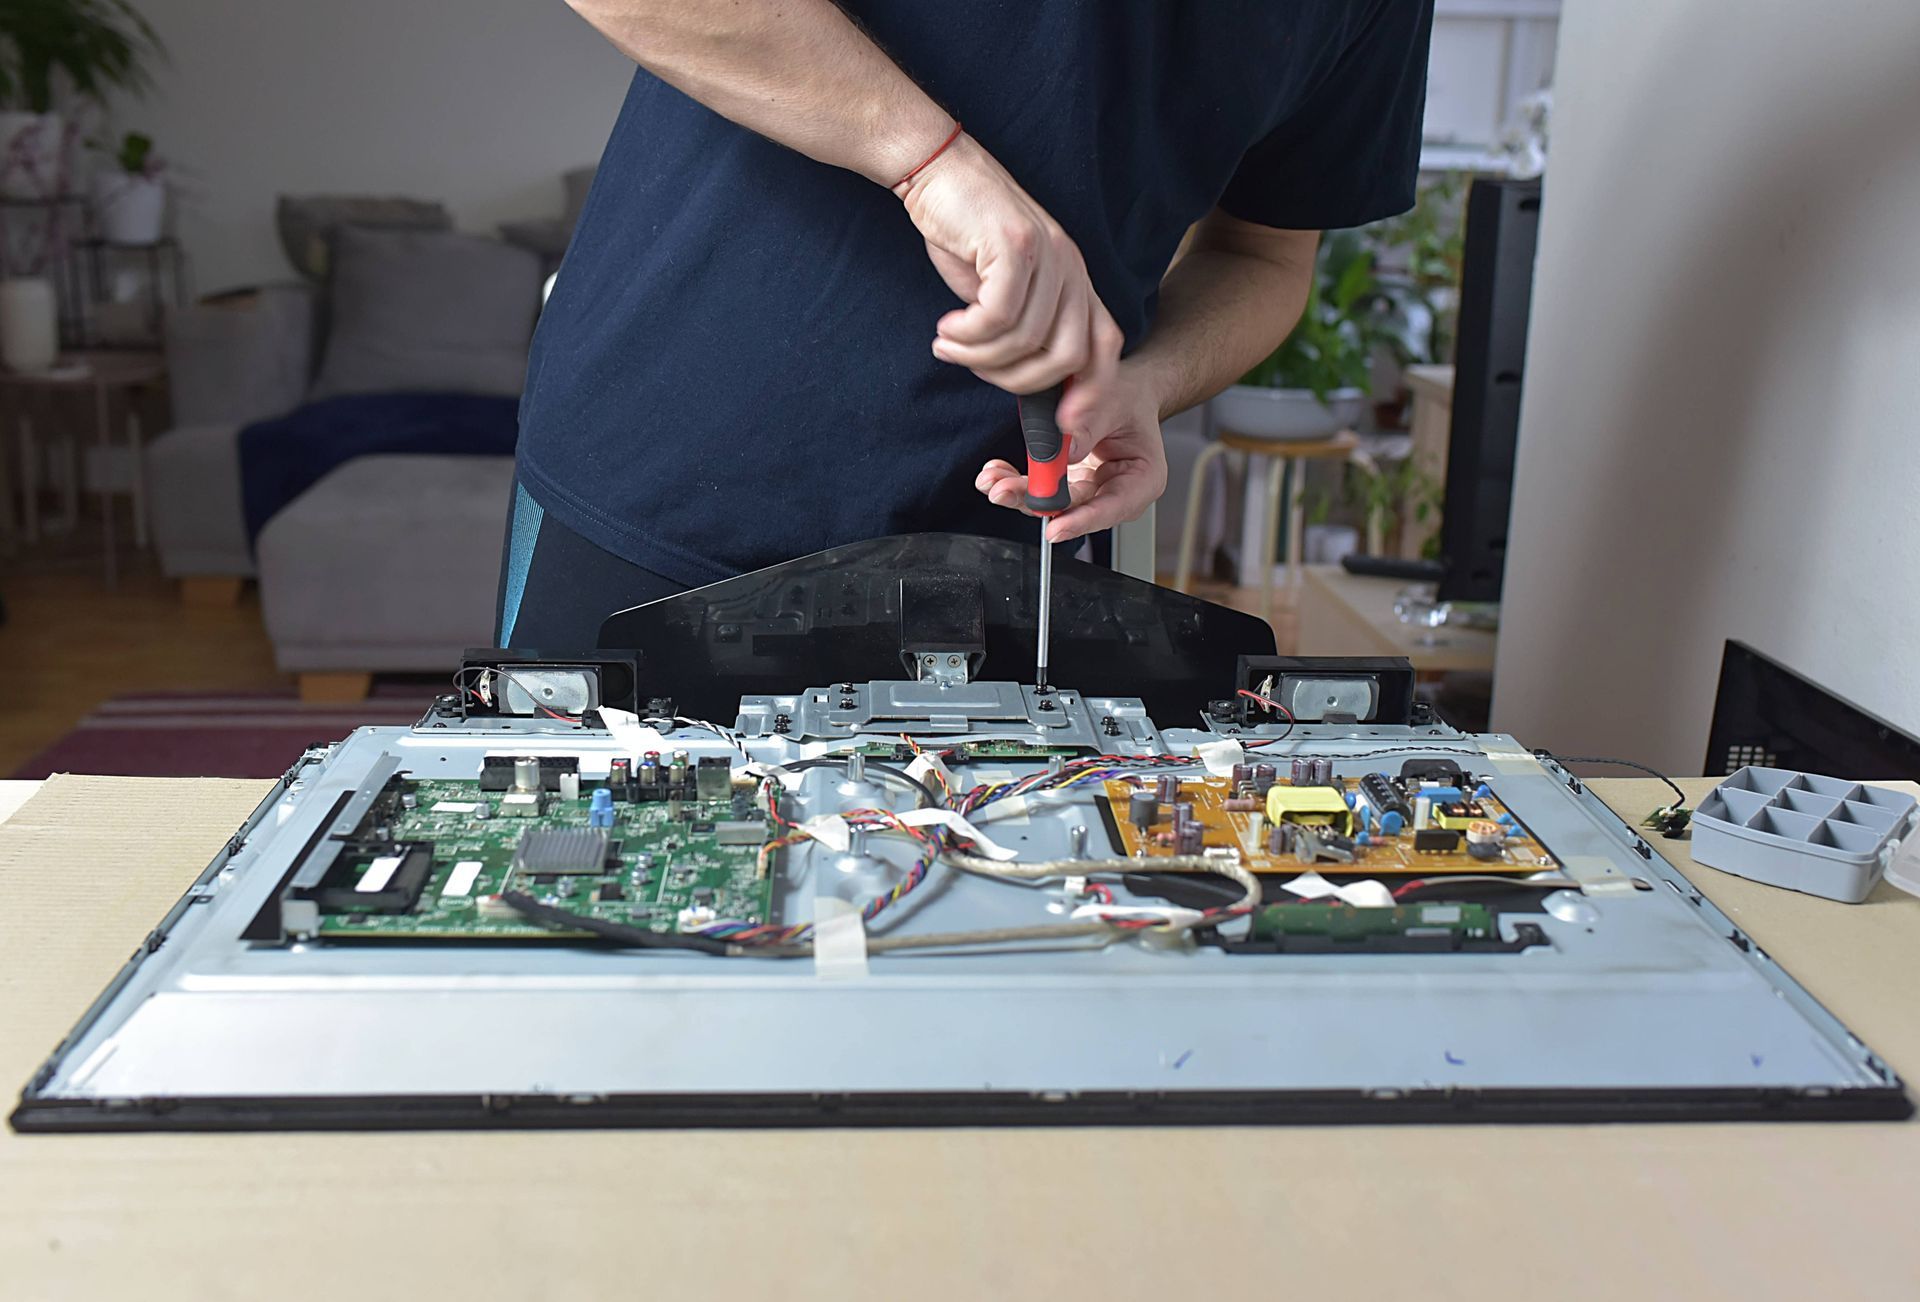 a man is working on a flat screen tv with a screwdriver